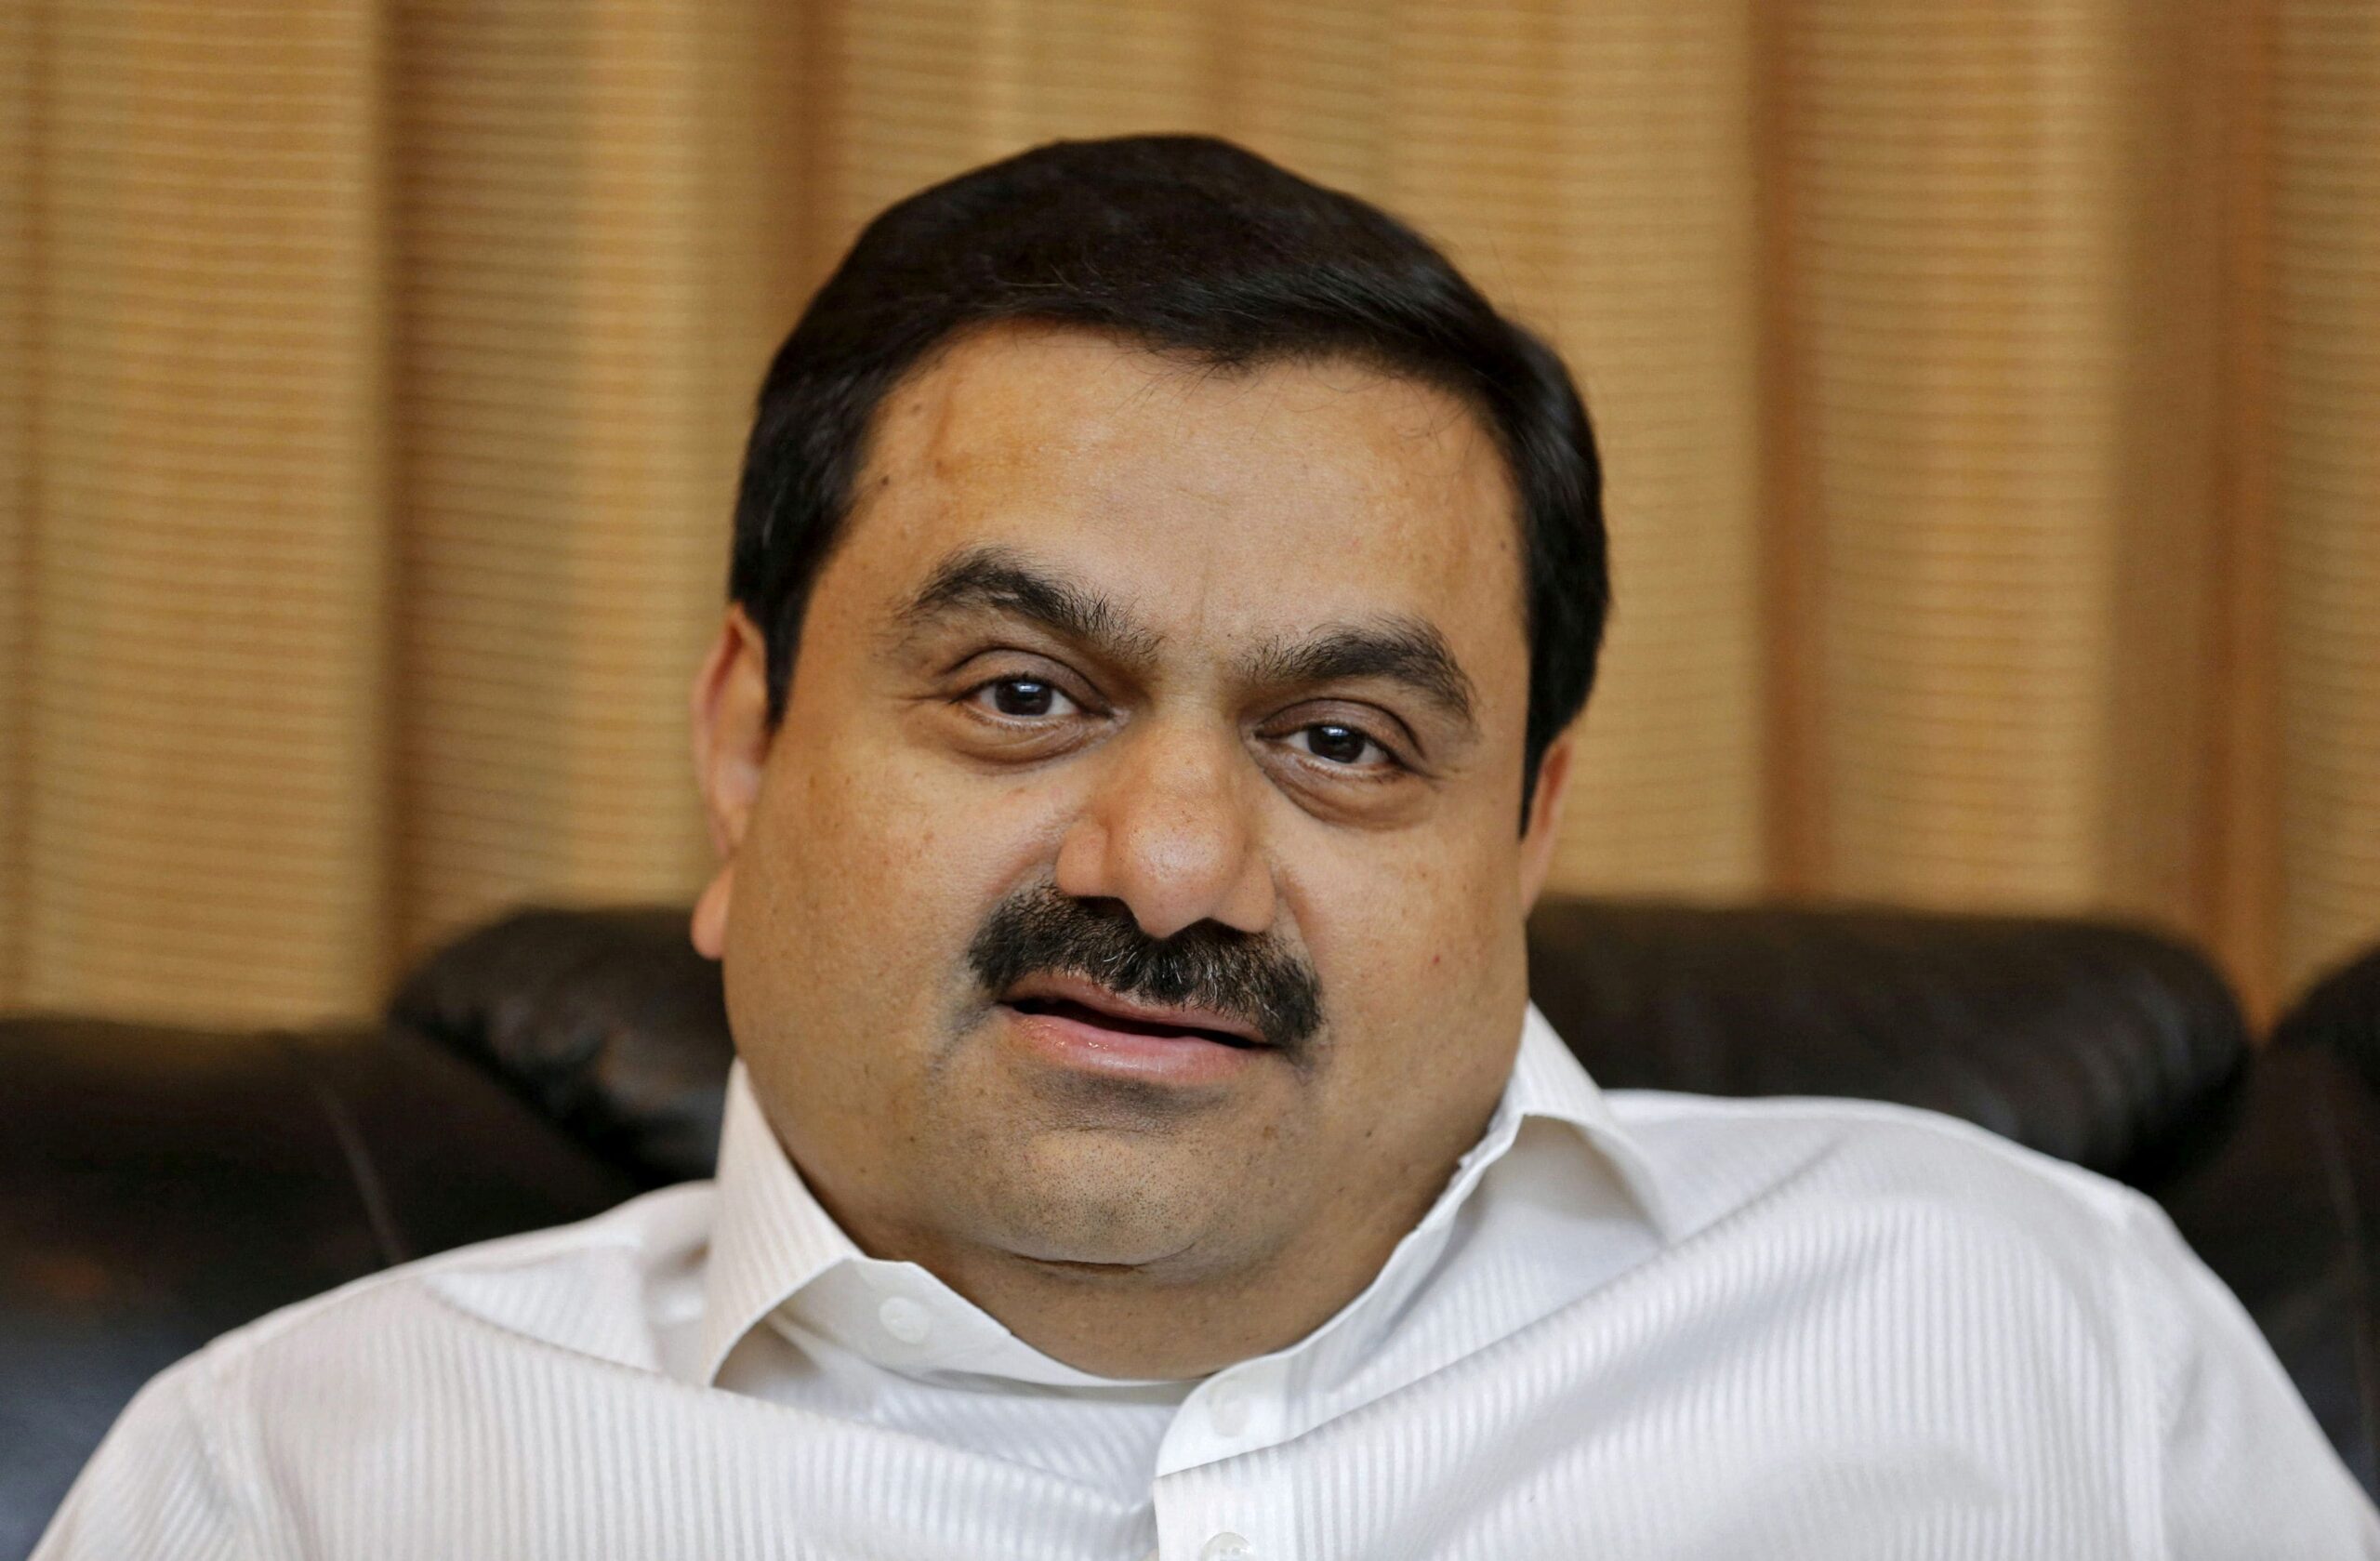 Gautam Adani Says Never Walked Away From India Investments, Spending $70 Billion